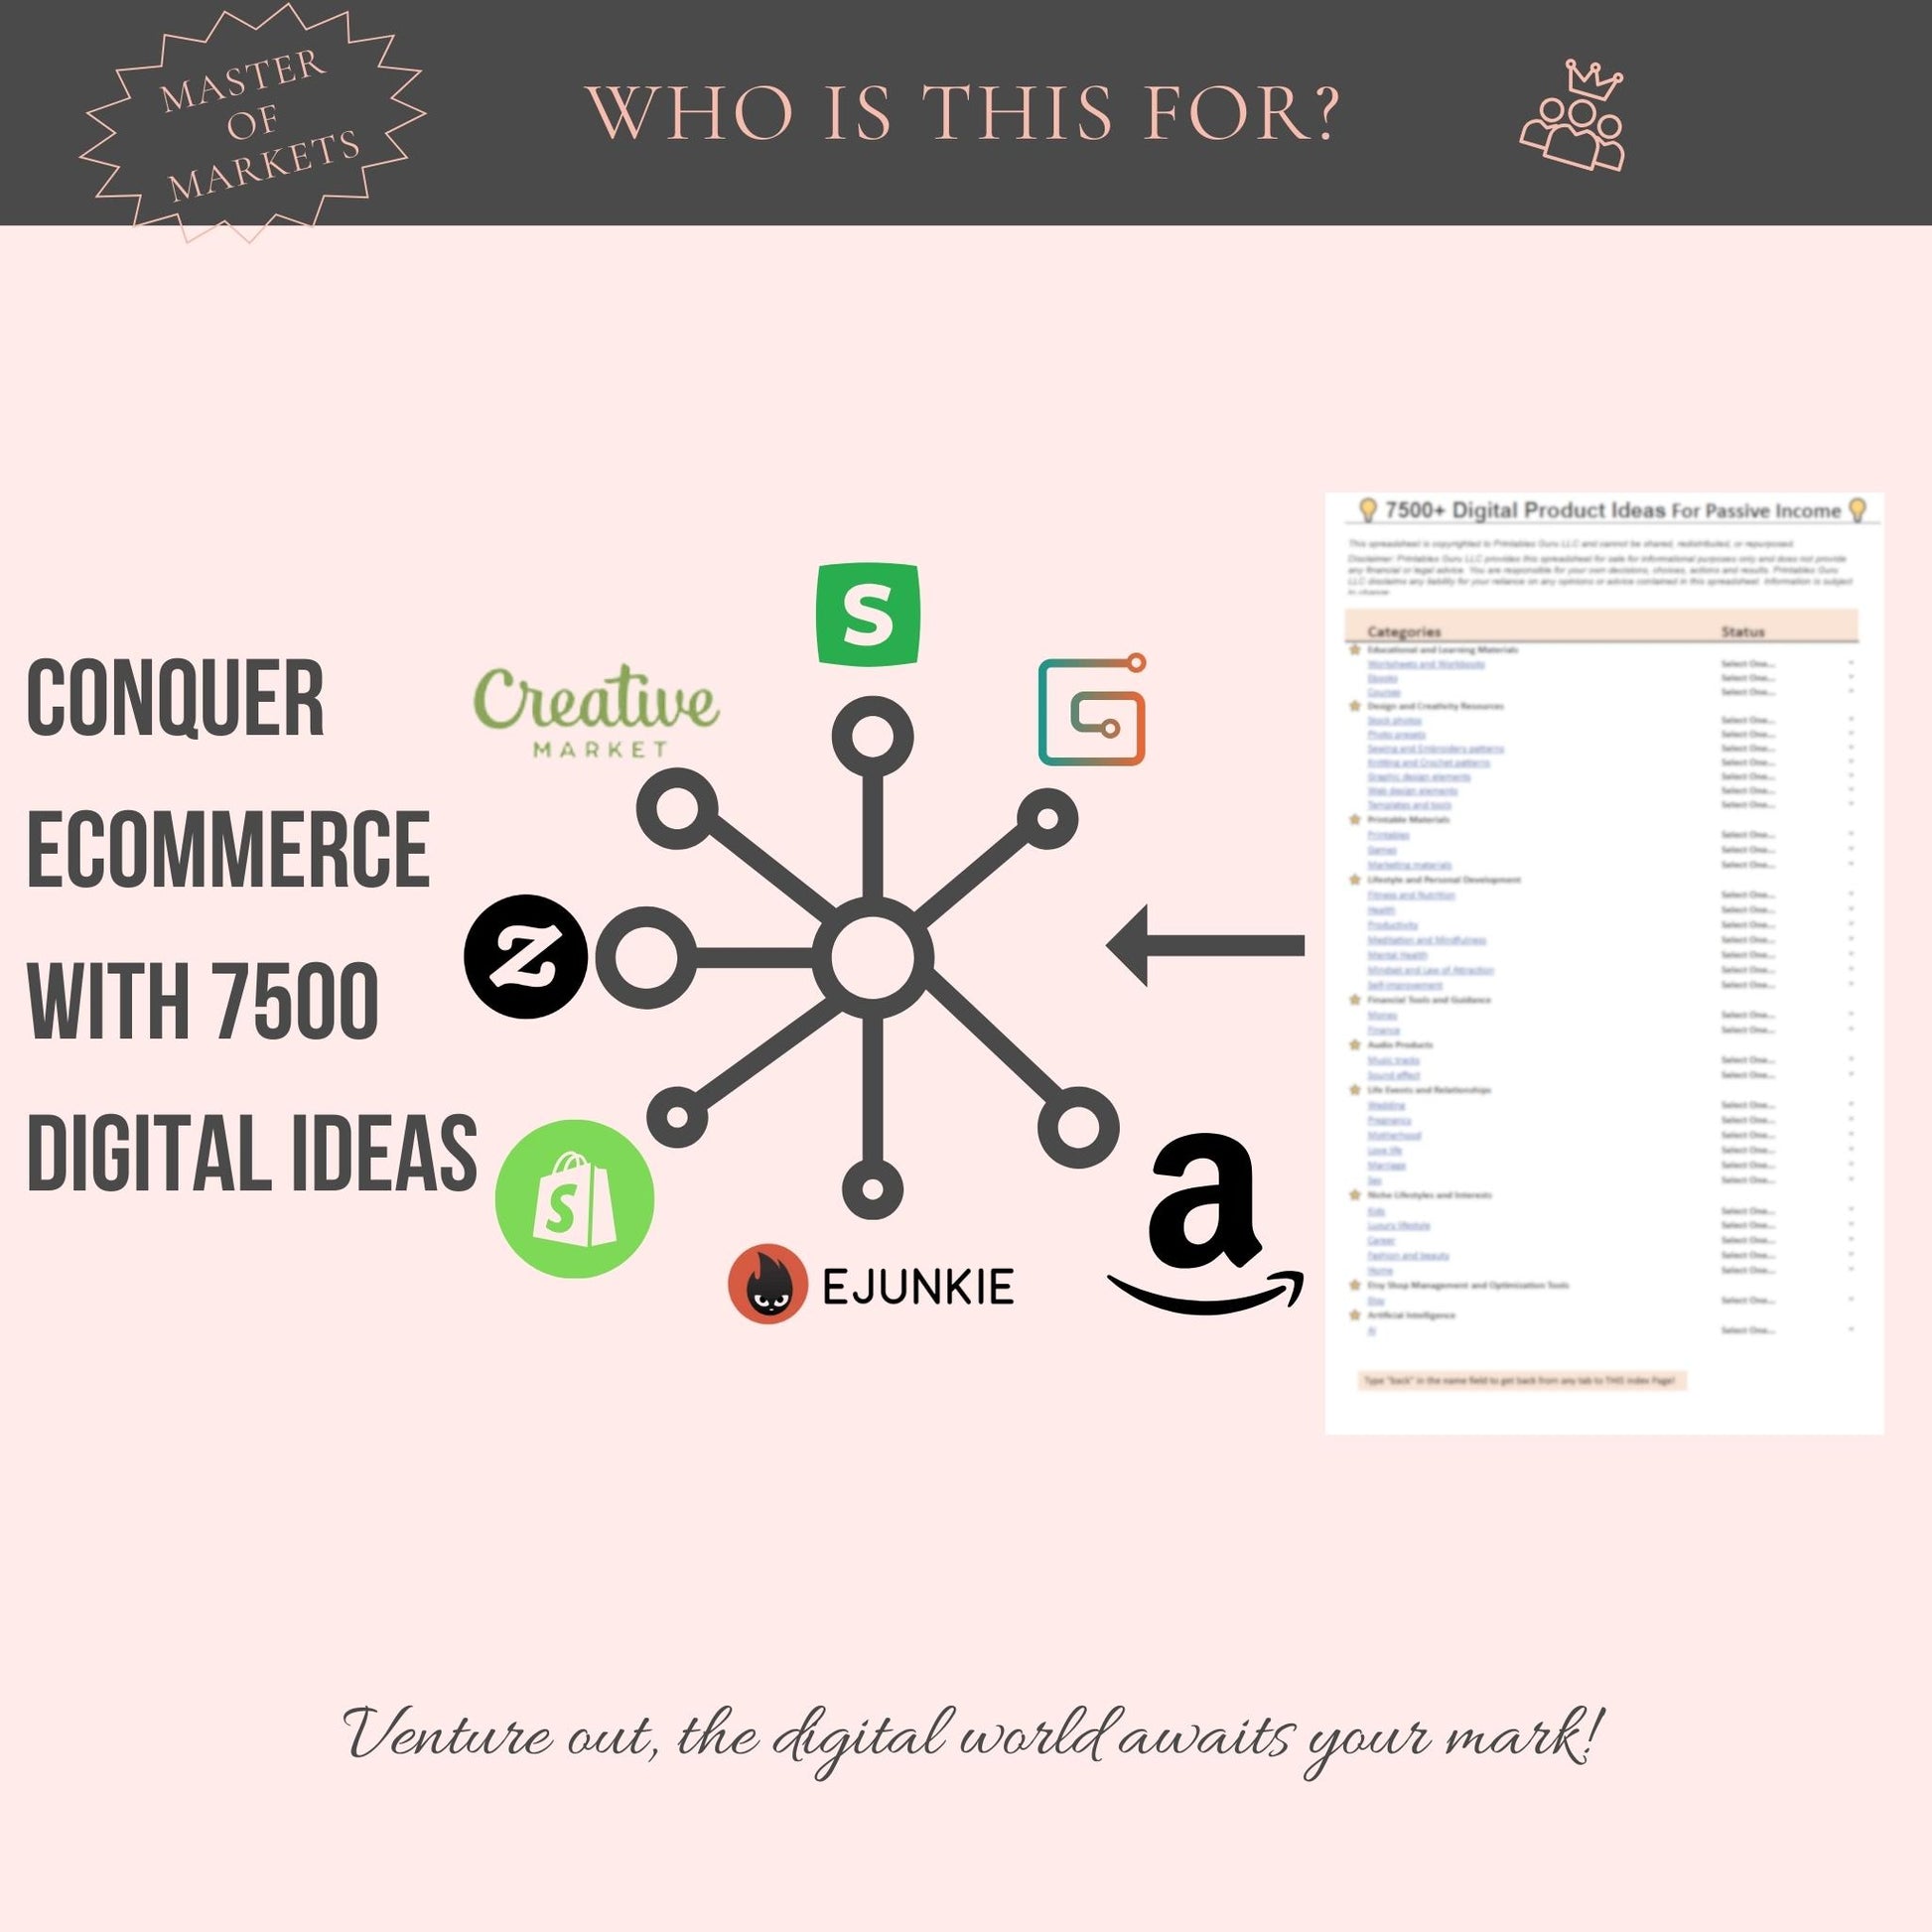 Top center: Who is this for? Master of Markets in circle, king icon with crown. Left middle: Conquer eCommerce with 7500 digital ideas. Center middle: Logos of platforms to sell digital products, including Amazon.